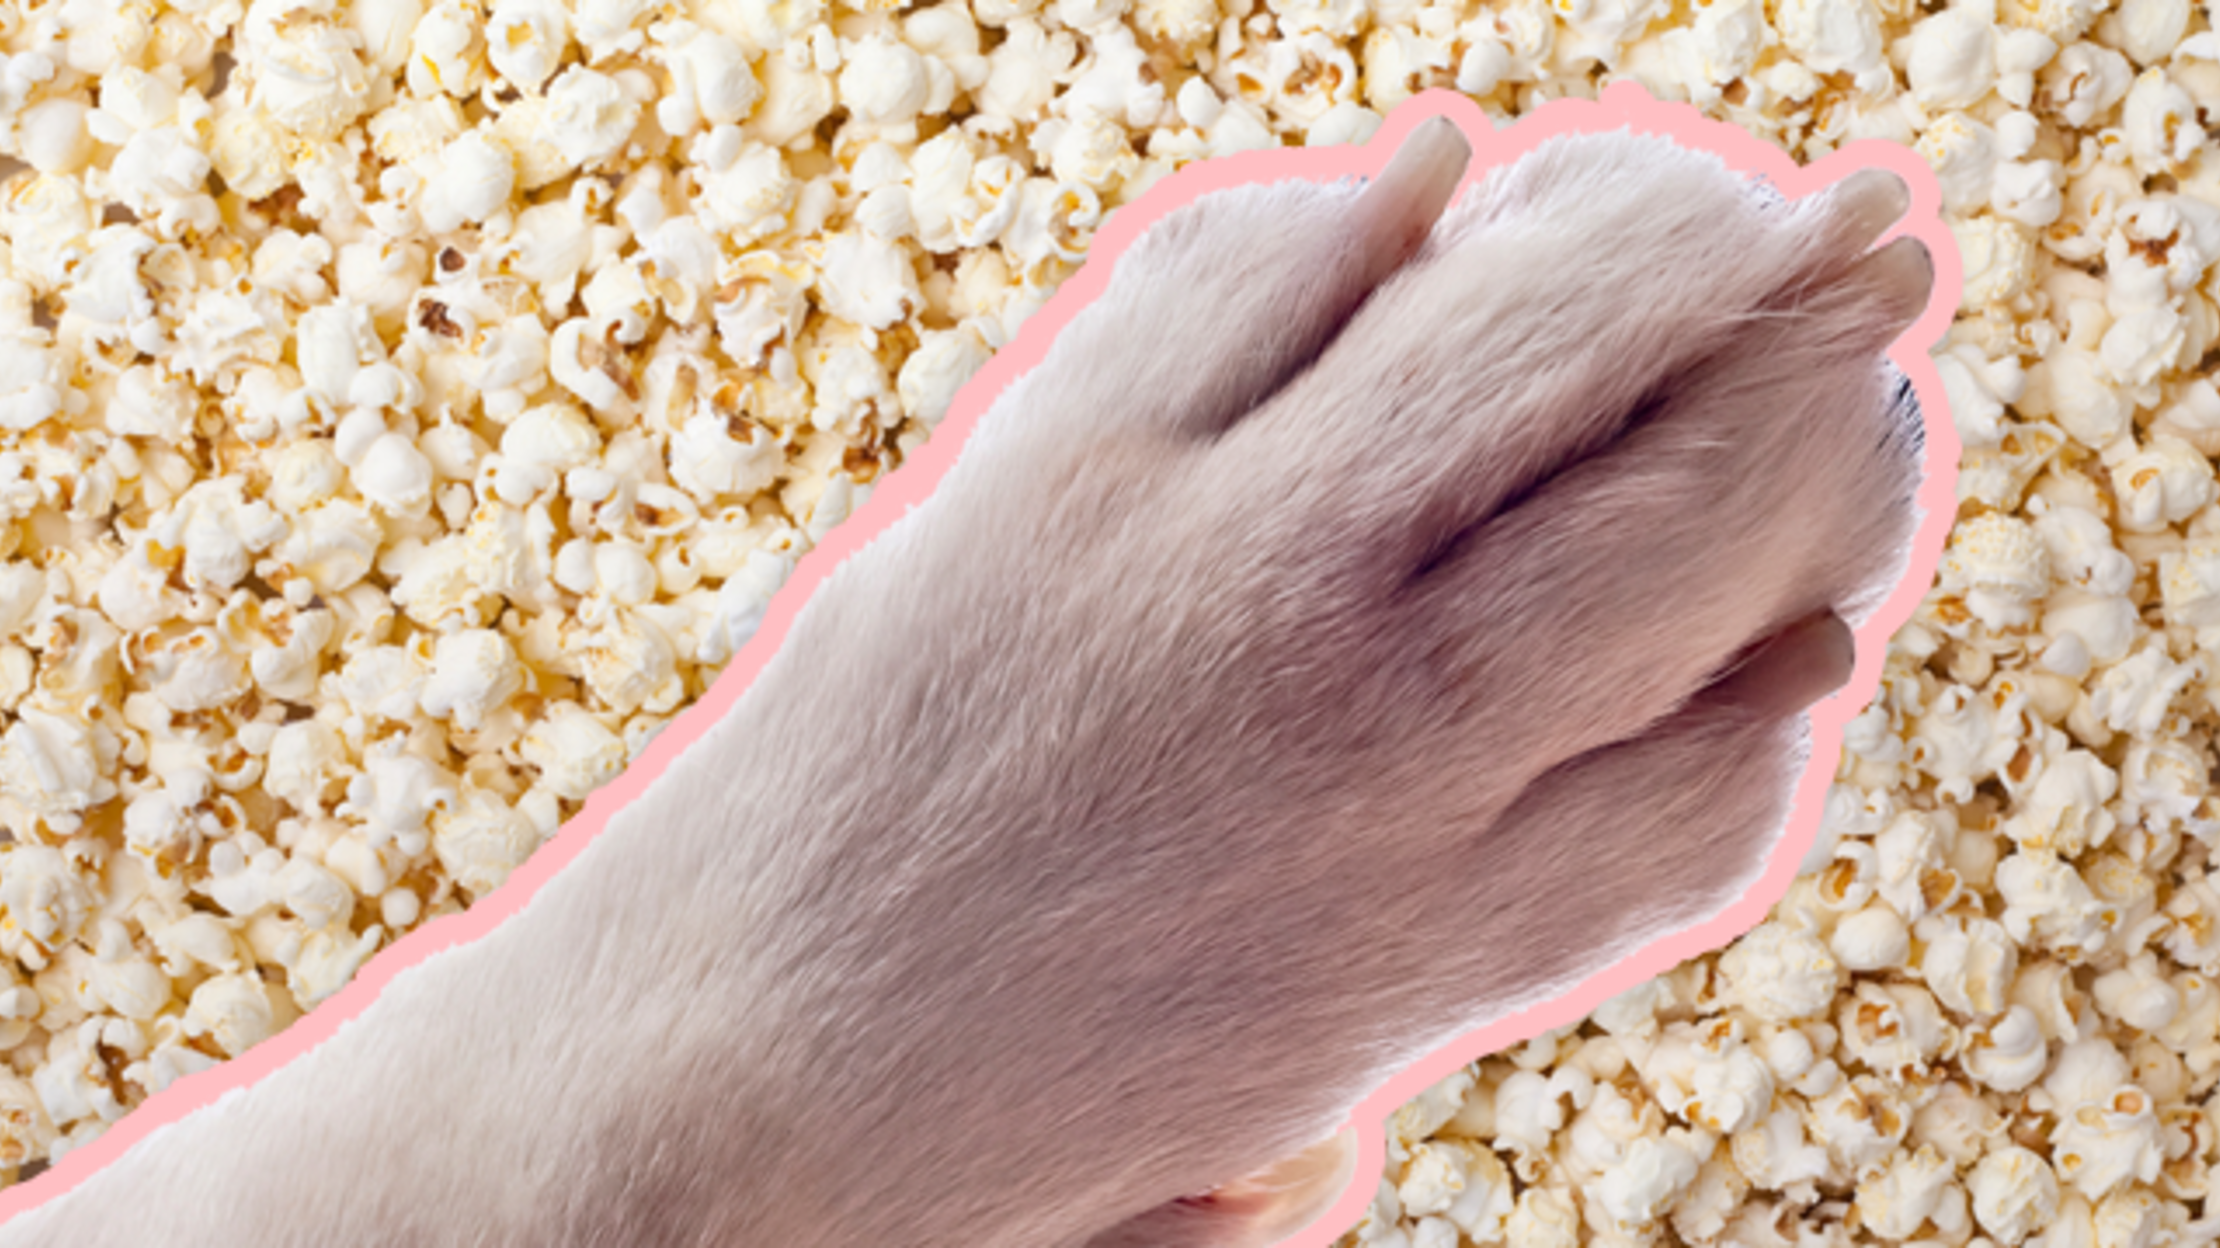 Why Do Your Dog's Feet Smell Like Popcorn? | Mental Floss